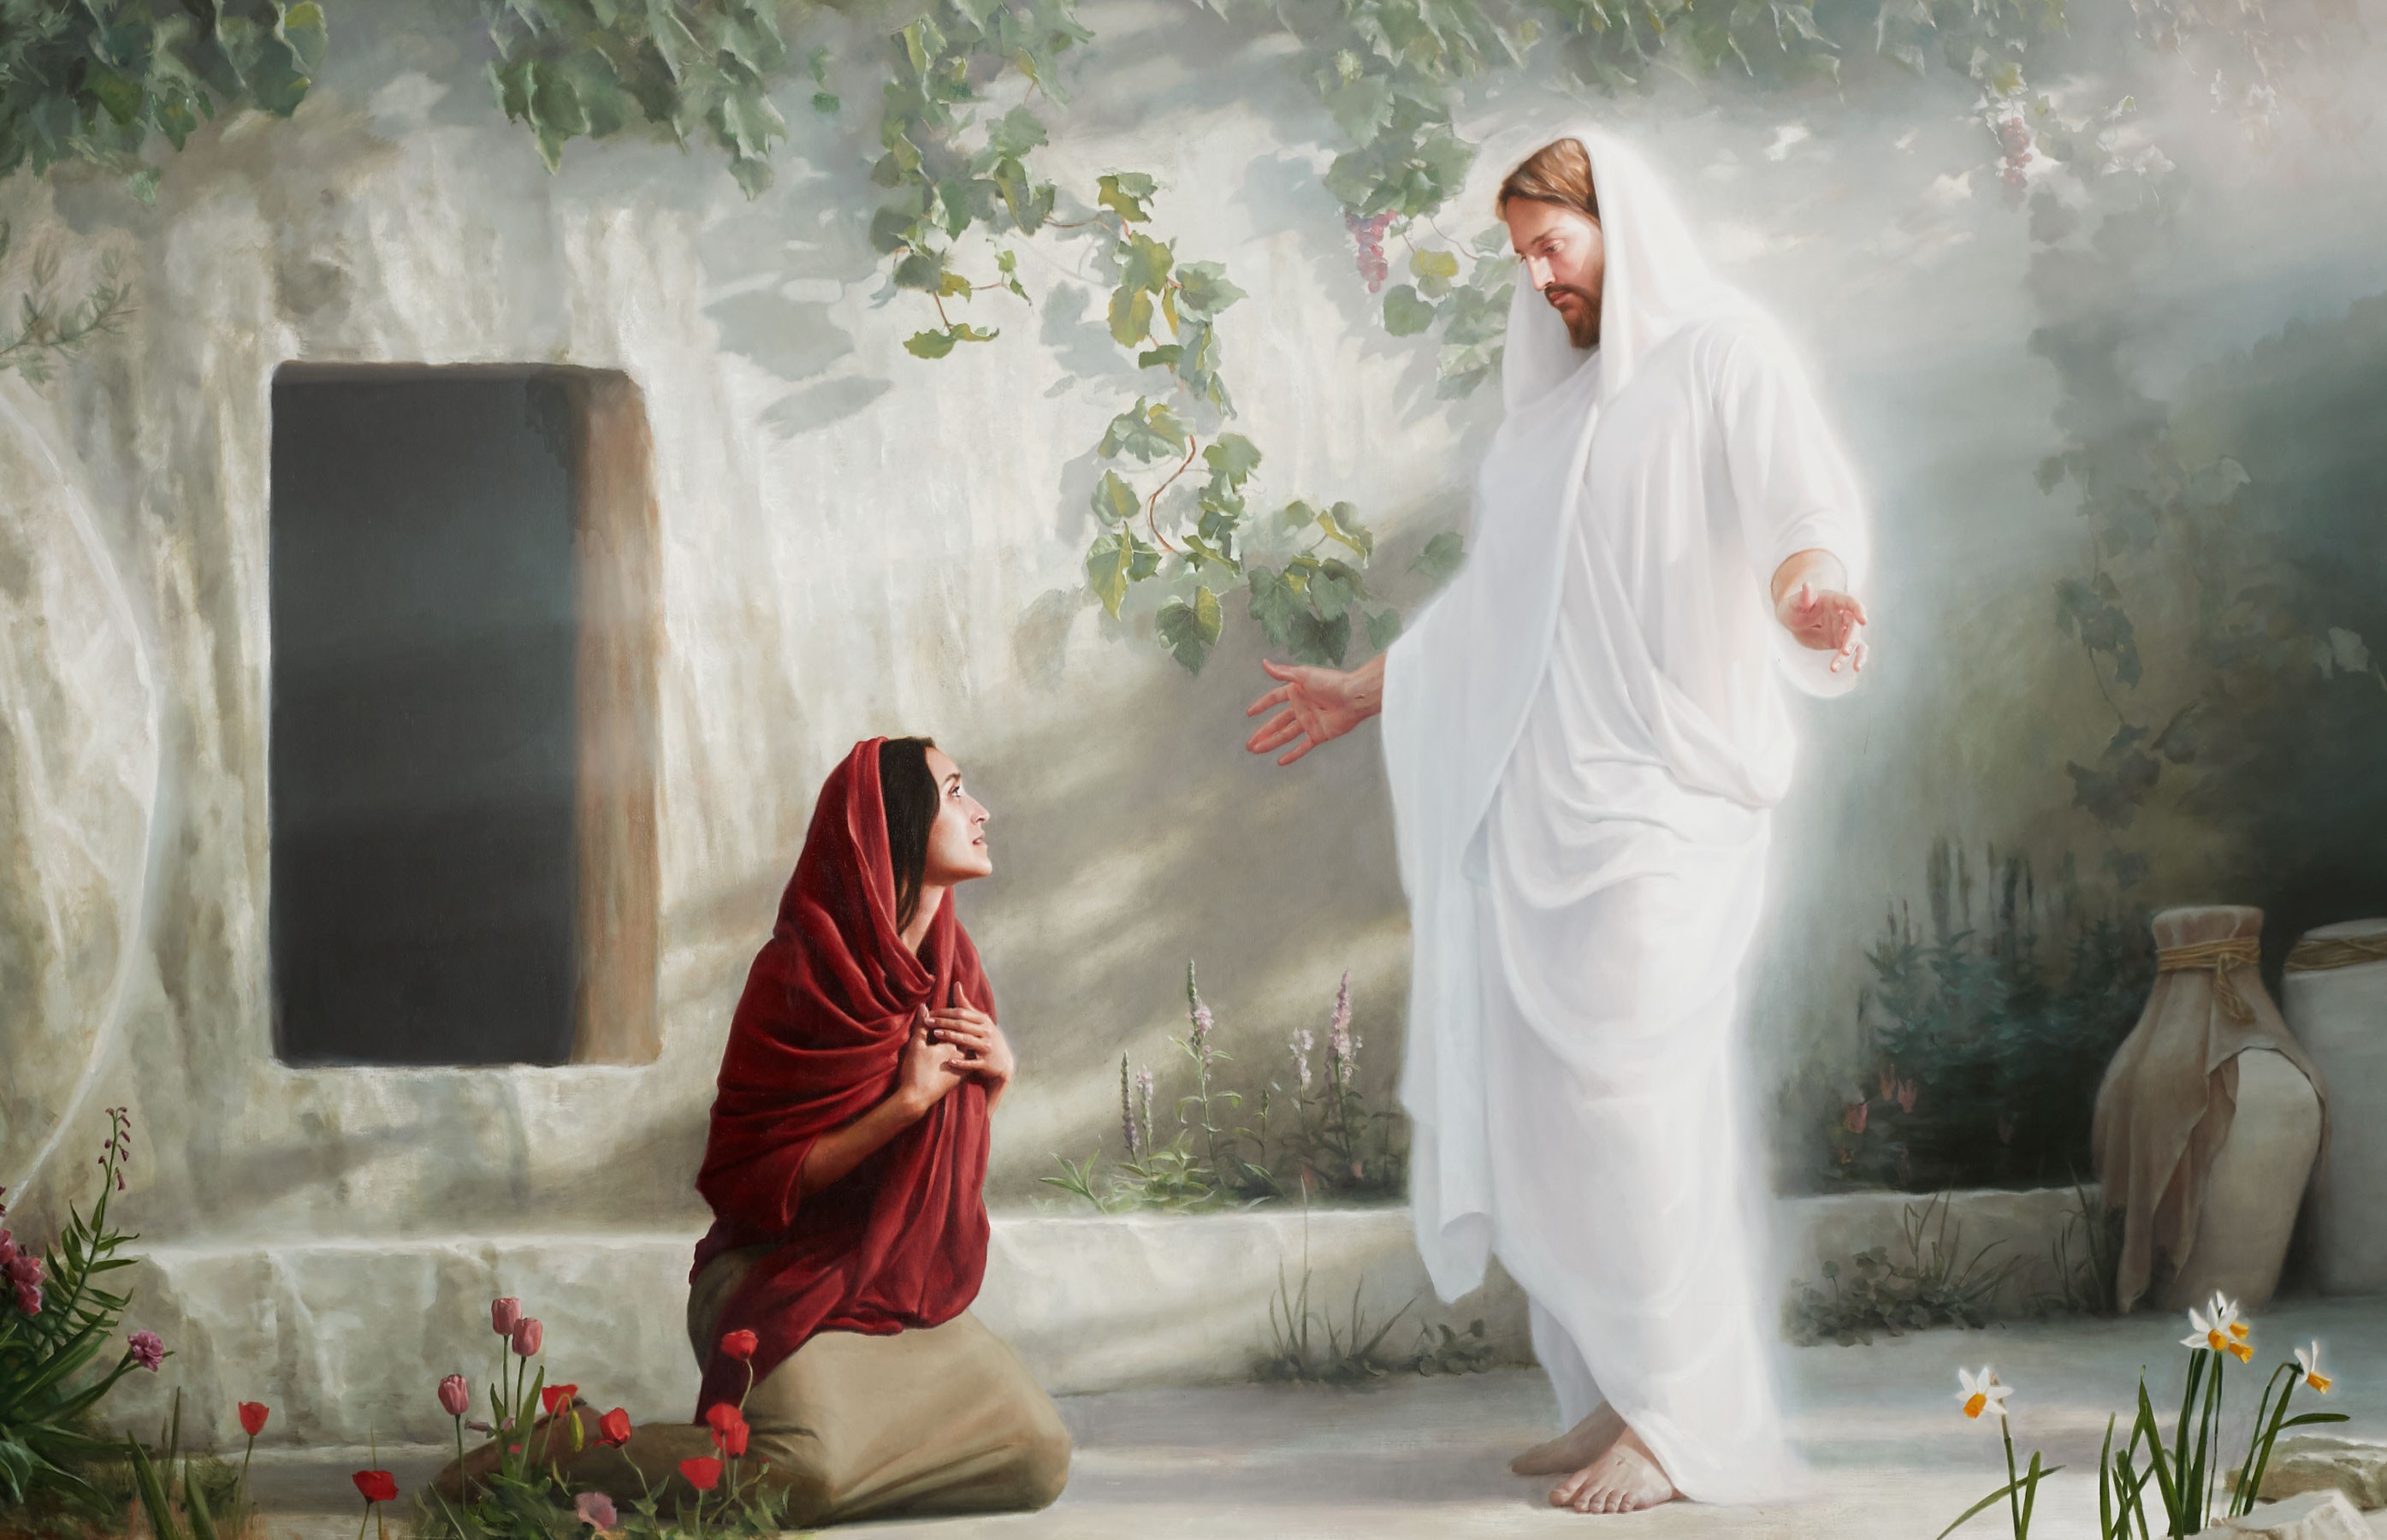 The resurrected Christ is depicted appearing to Mary Magdalene outside the entrance to the empty tomb.